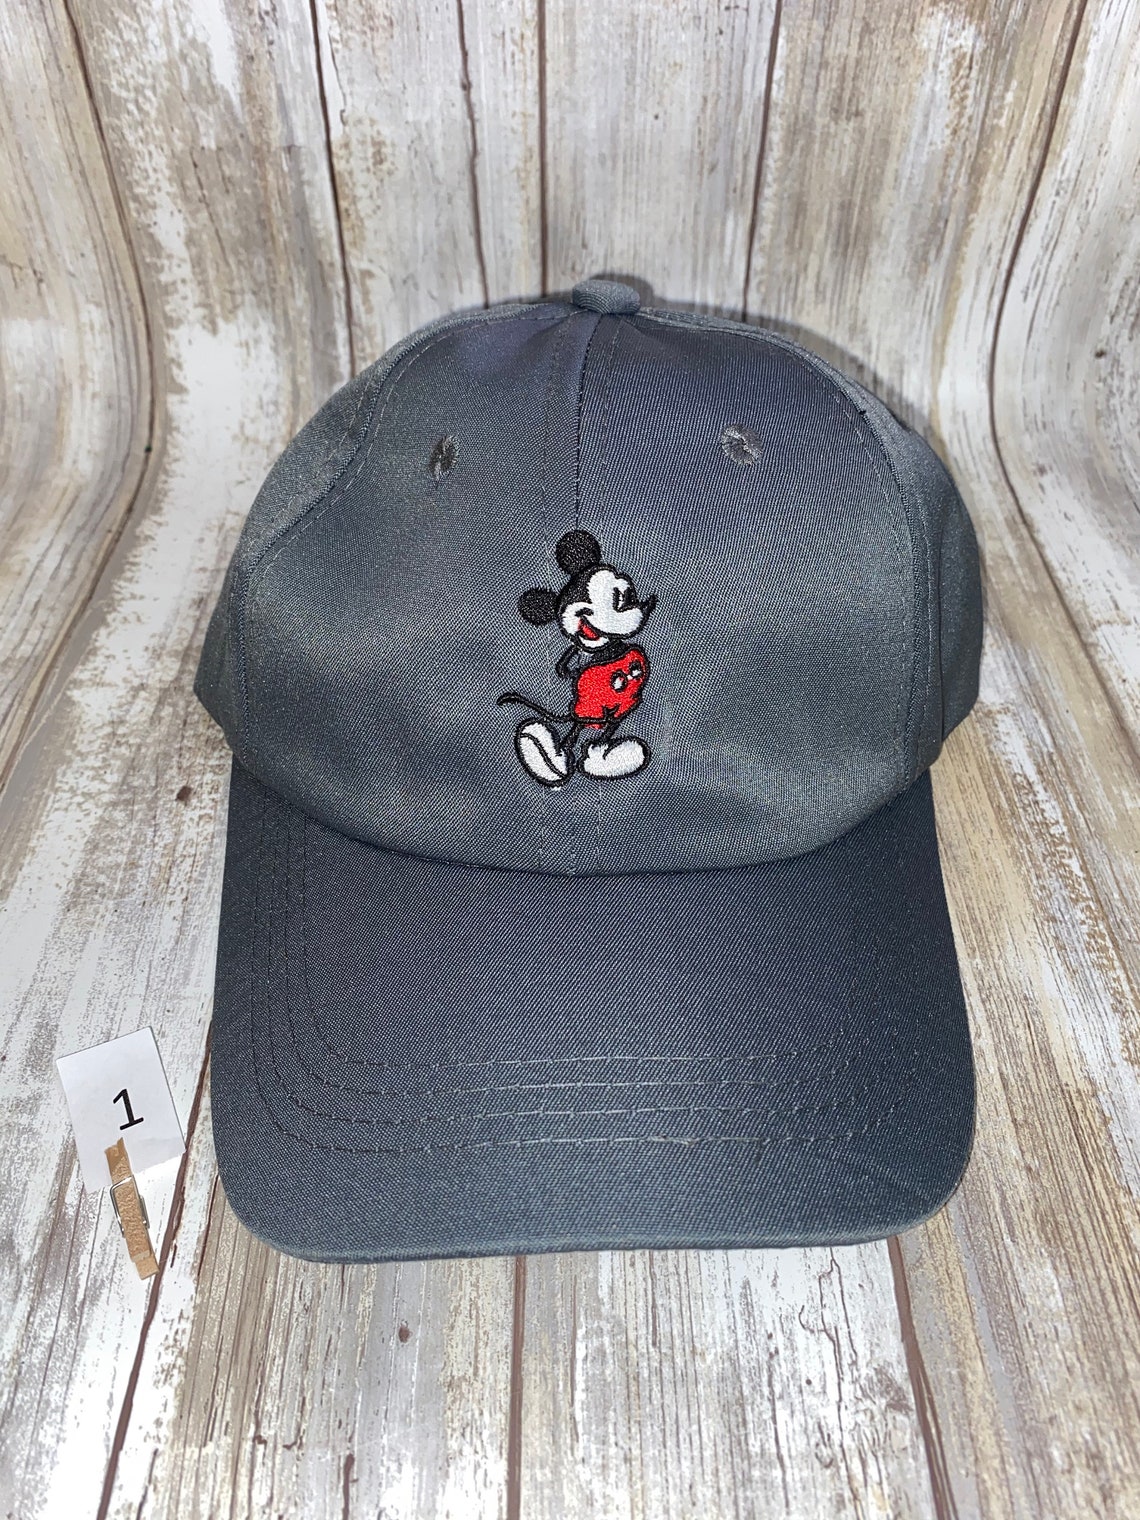 NEW Hat Inspired Mickey Mouse Hat soft fabric Mouse Ears | Etsy